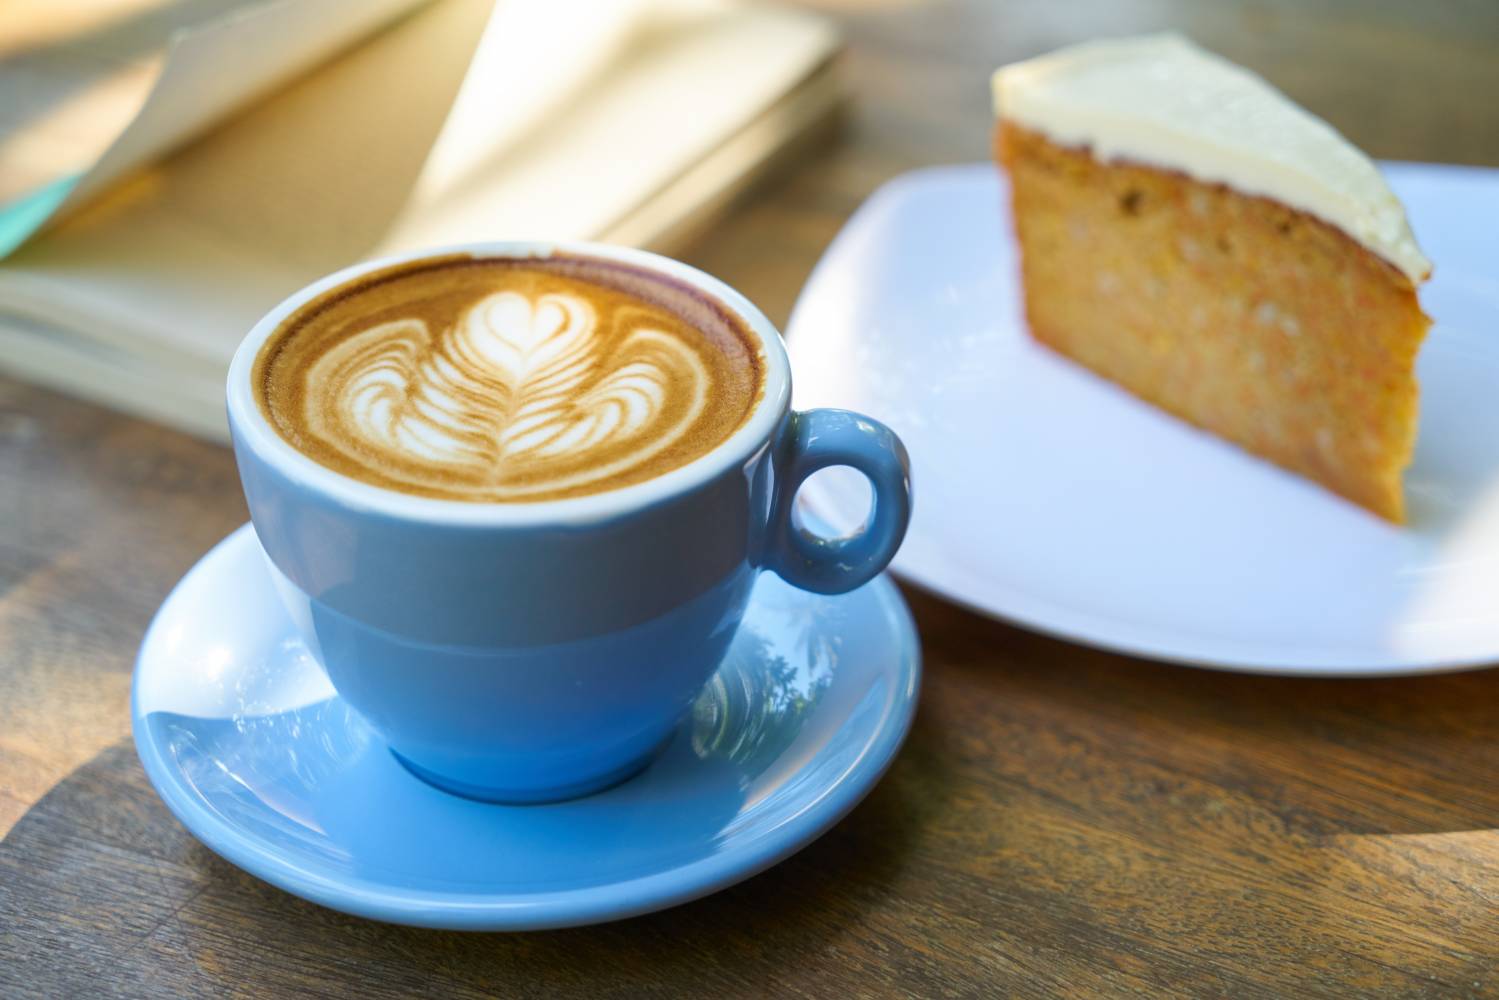 Tasty cake, a cappuccino and a cozy atmosphere in one of our favorite coffeeshops